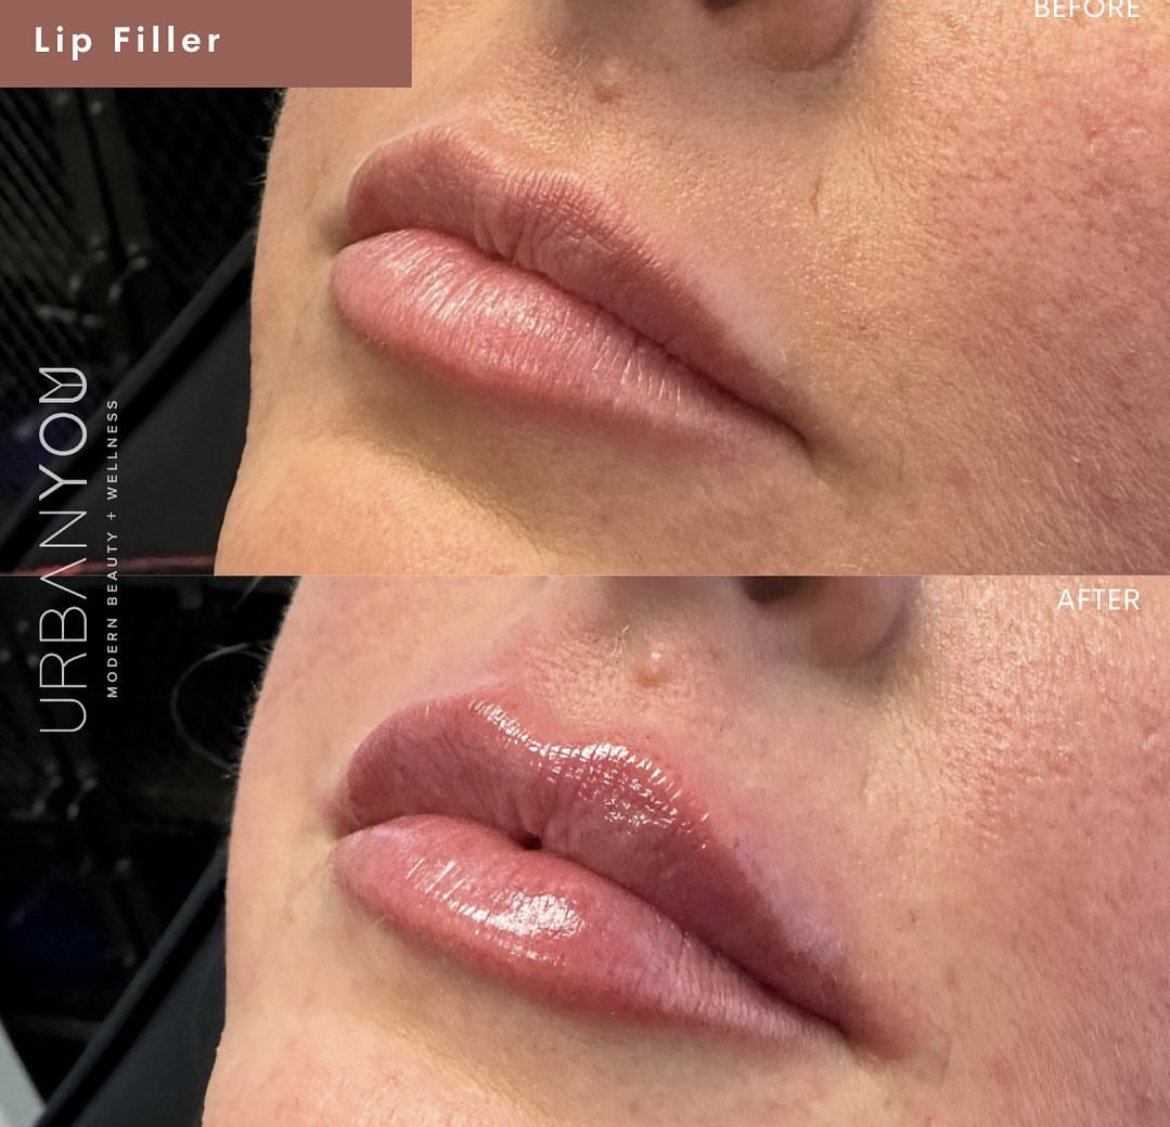 Lip filler before and after Instagram, The Urban You Medical Spa in Grand Rapids